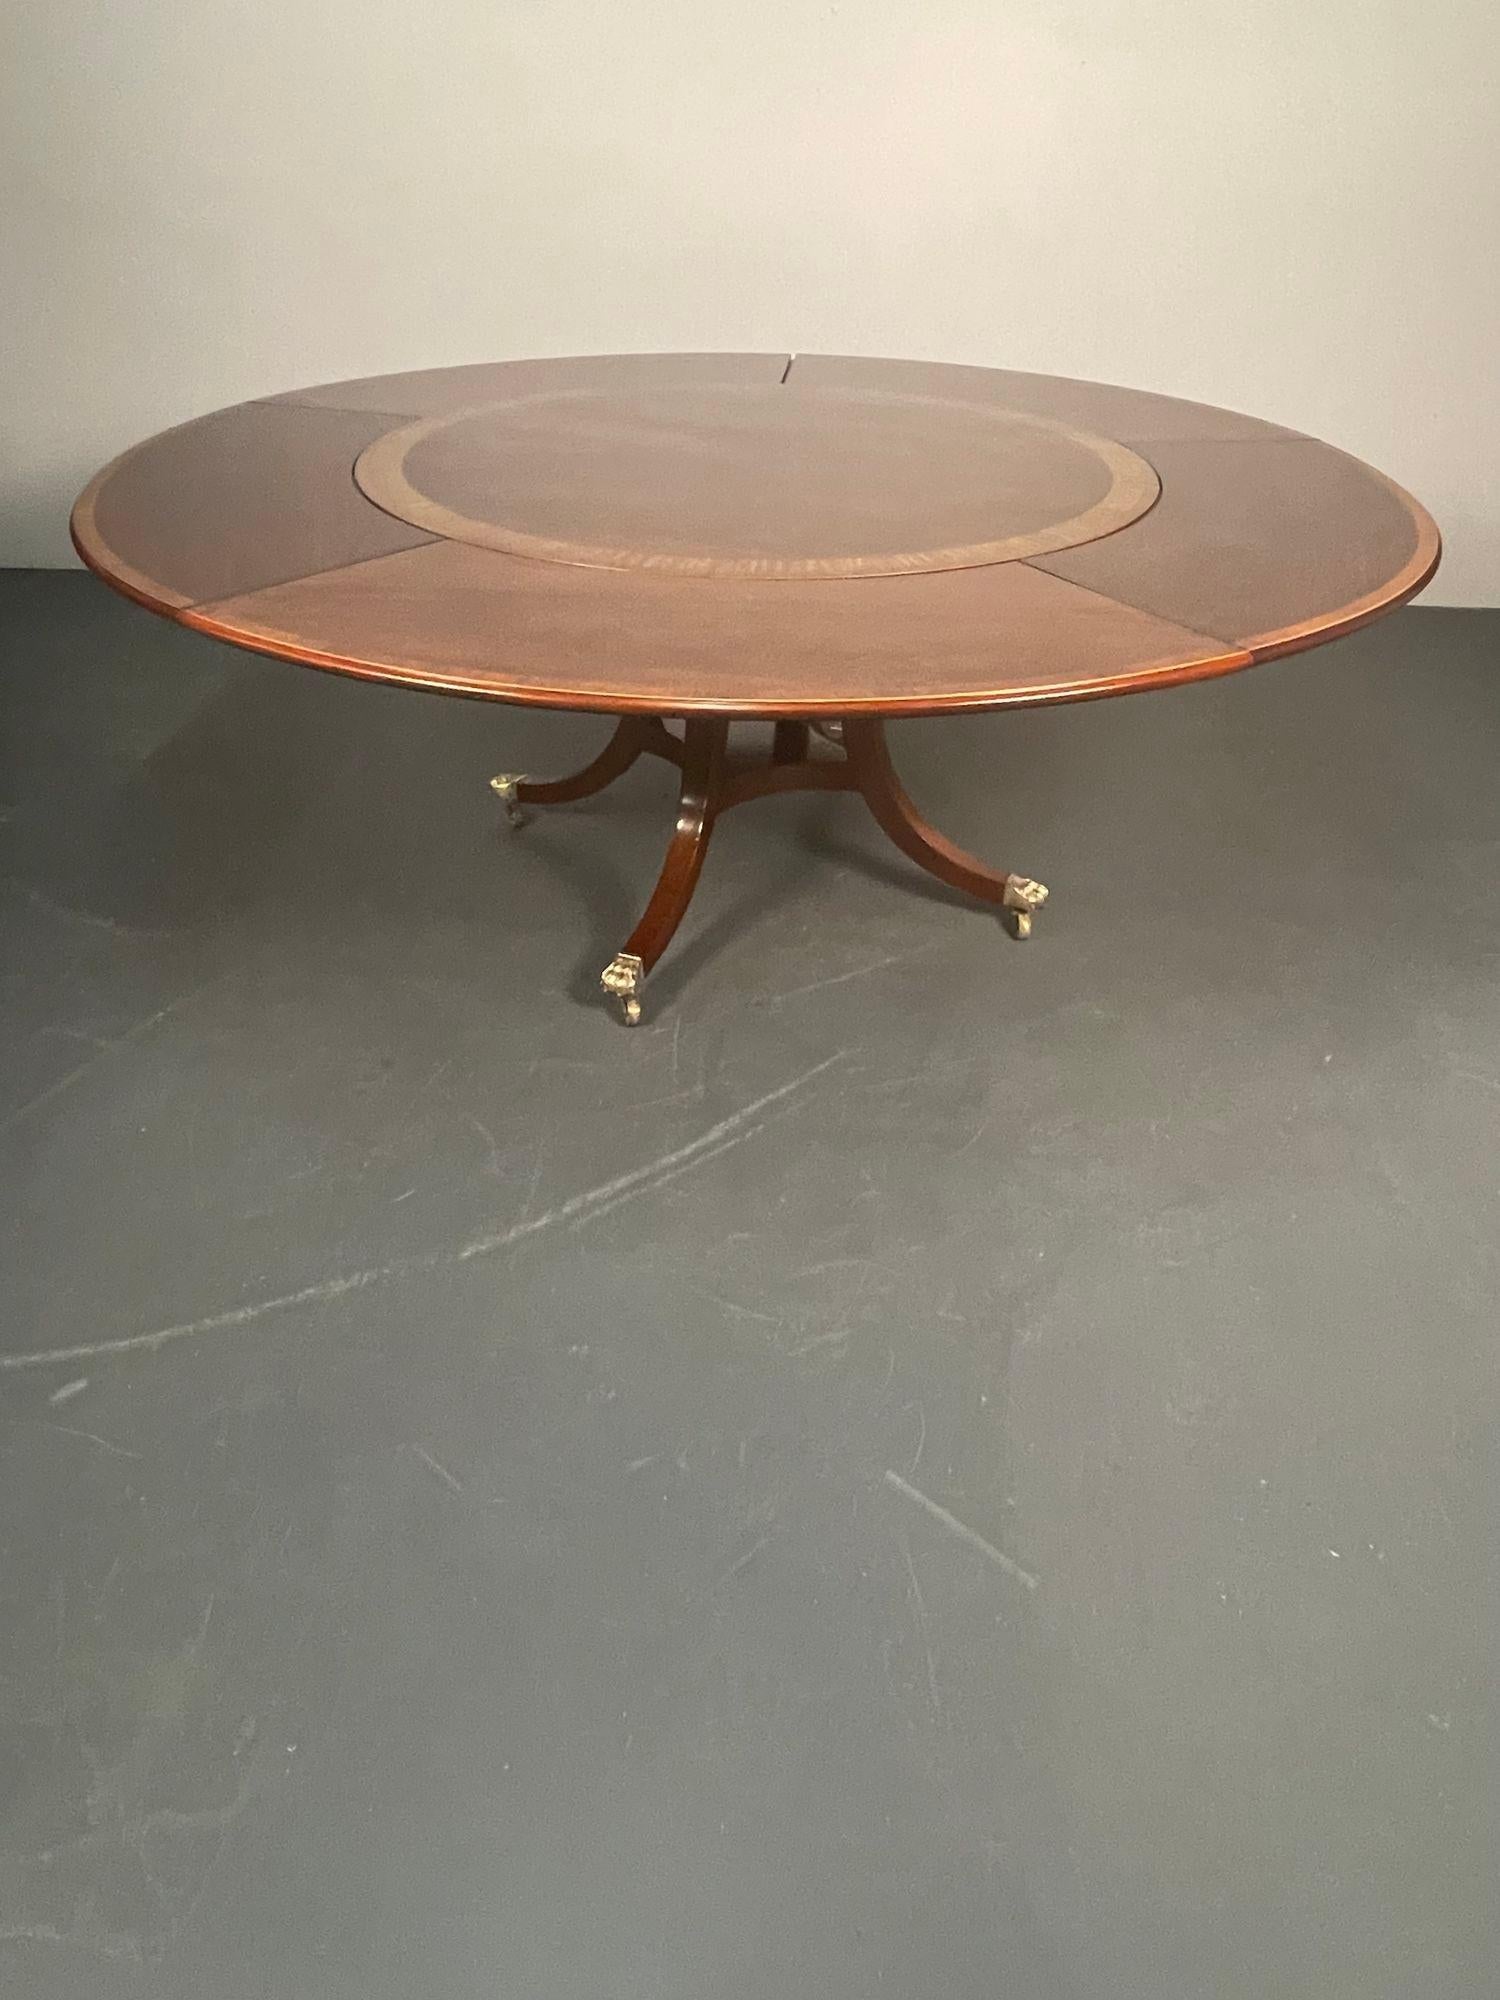 20th Century Georgian Style Mahogany Banded Center or Dining Table by William Tillman